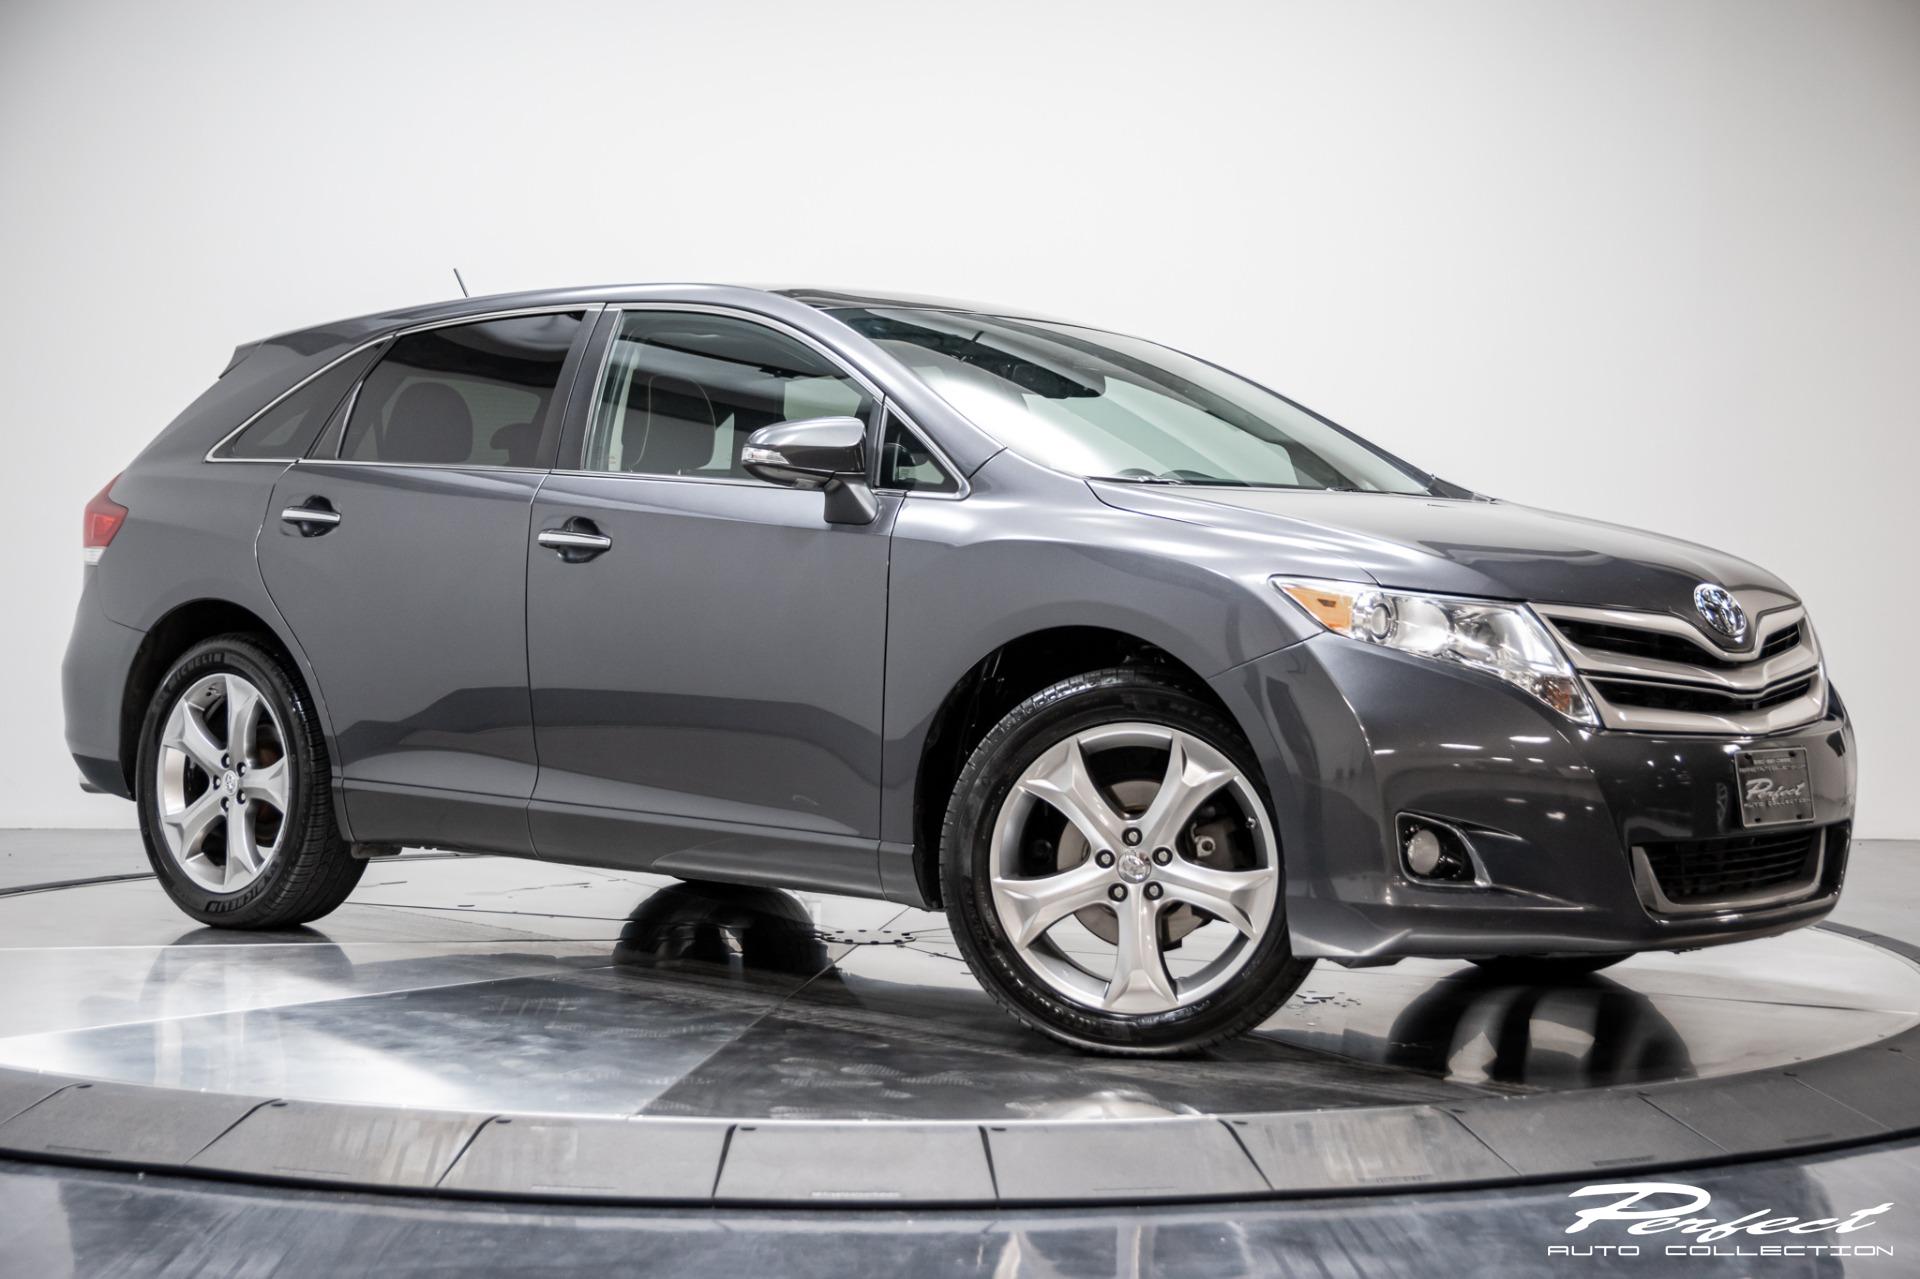 2015 Toyota Venza Overview  The News Wheel